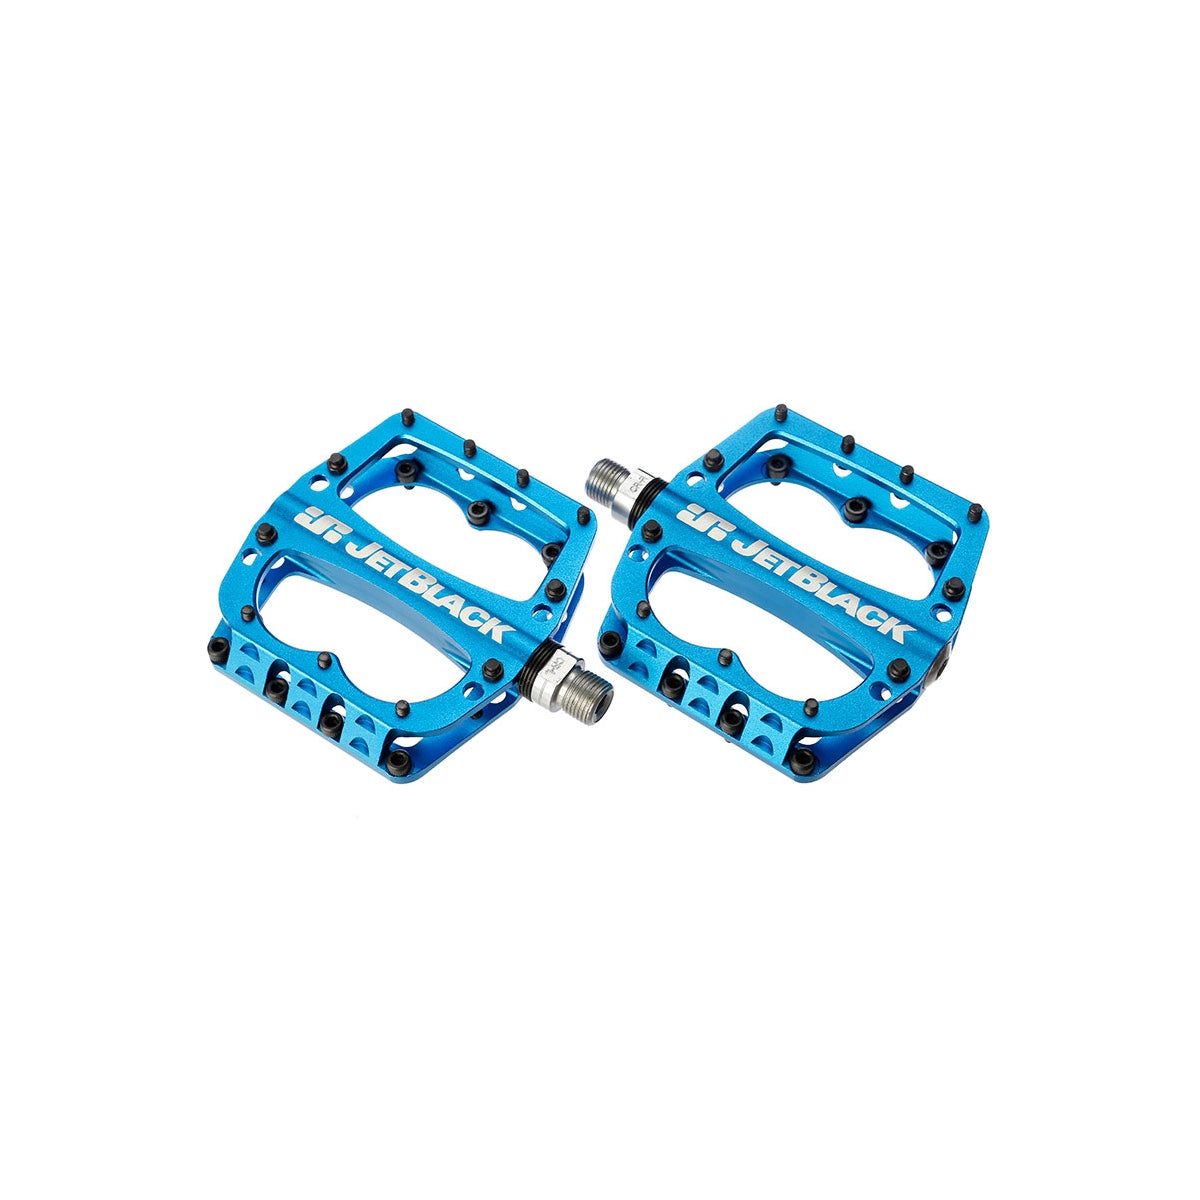 JetBlack Superlight MTB Pedals - Blue, Low Profile, Sealed Bearings